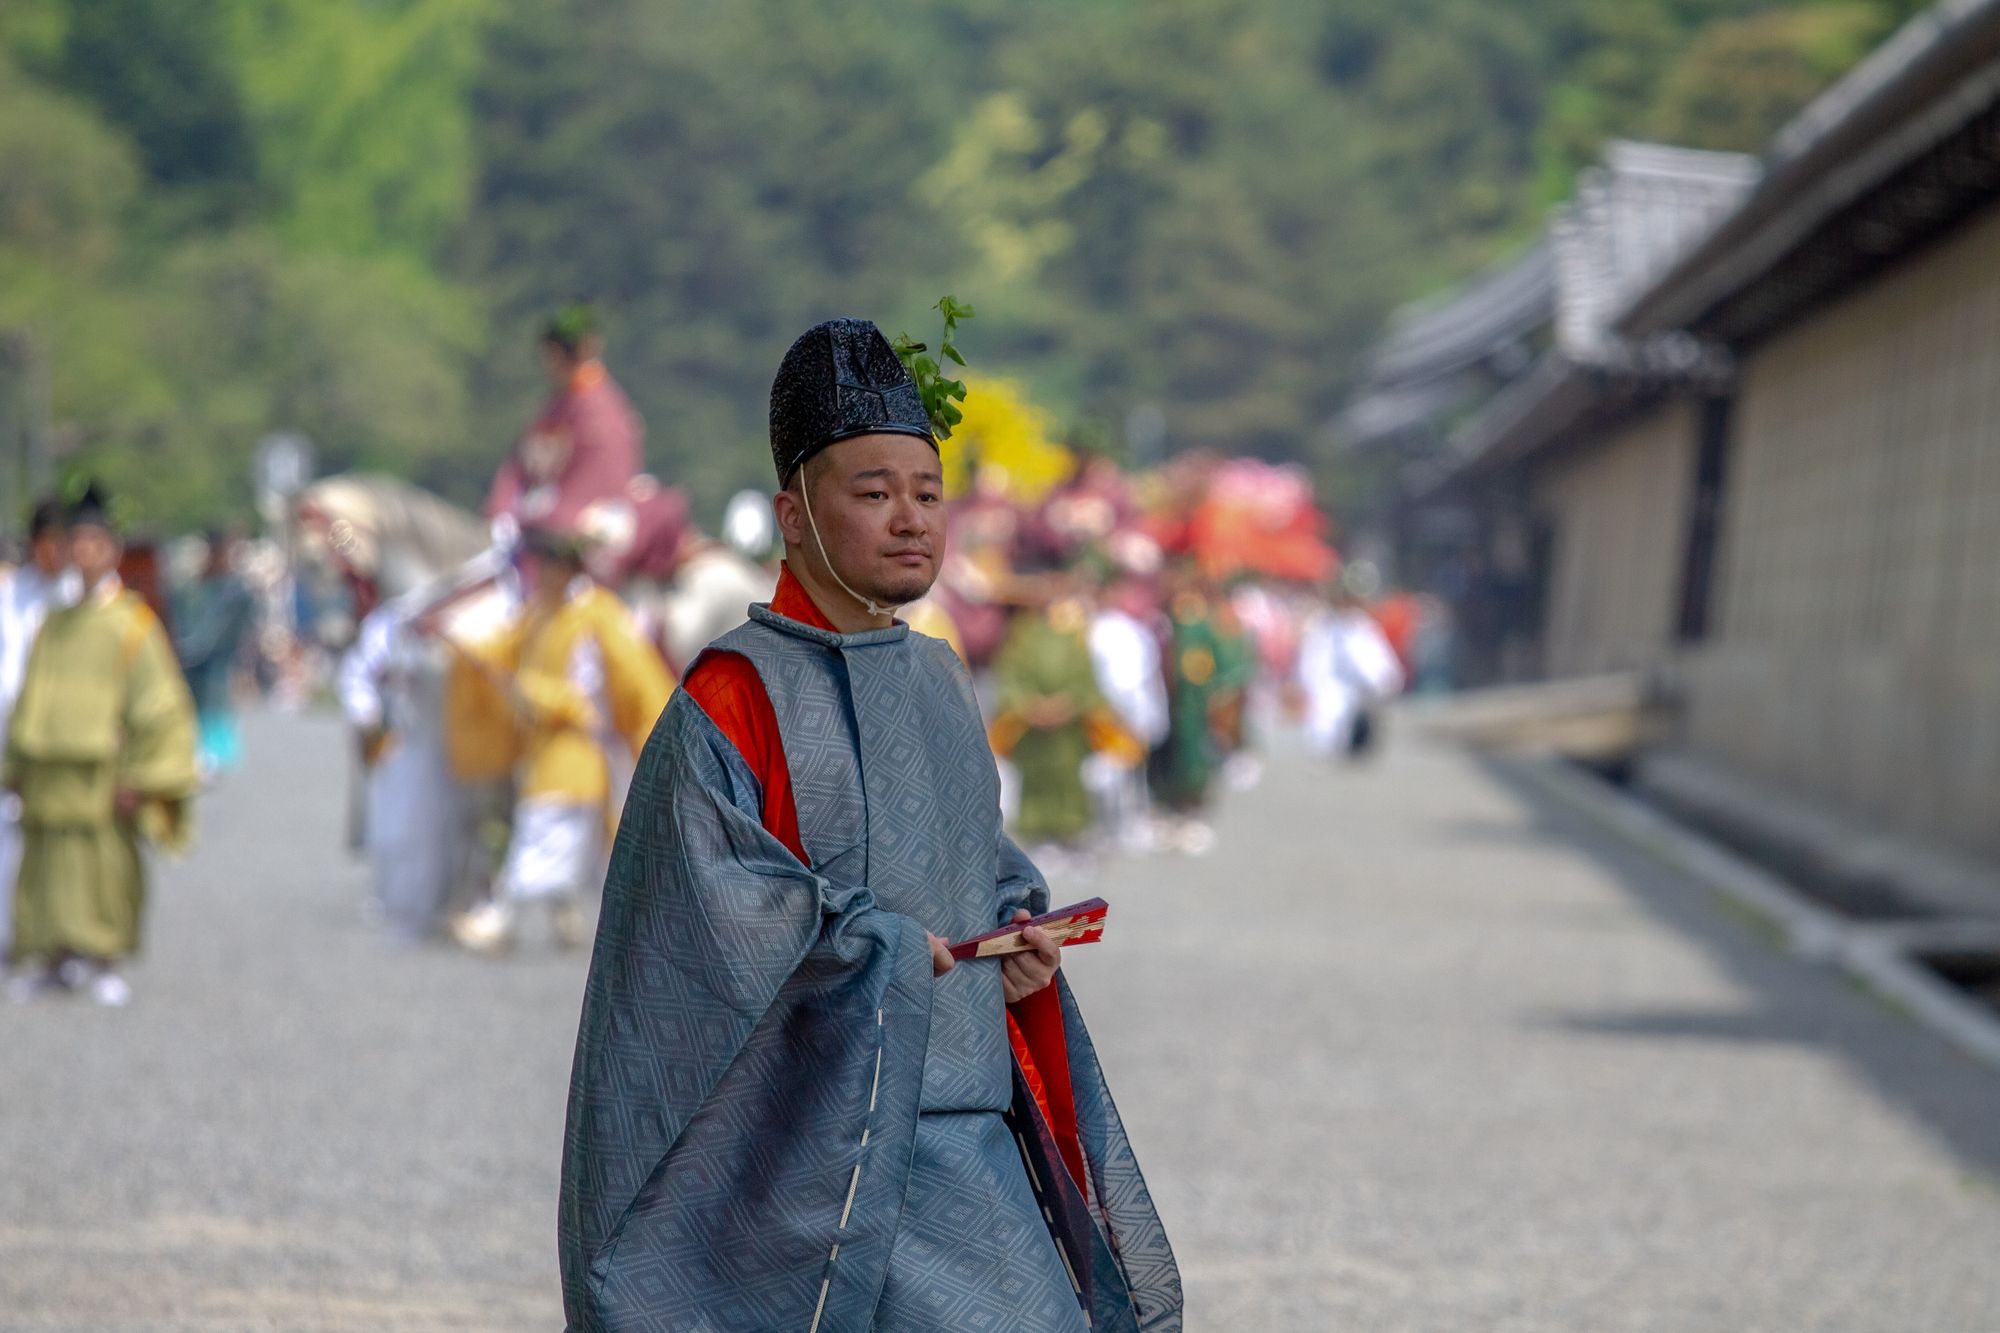 A man wearing traditional Japanese clothes. In the background out of focus is a parade procession of people in traditional styles, some mounted on horseback.